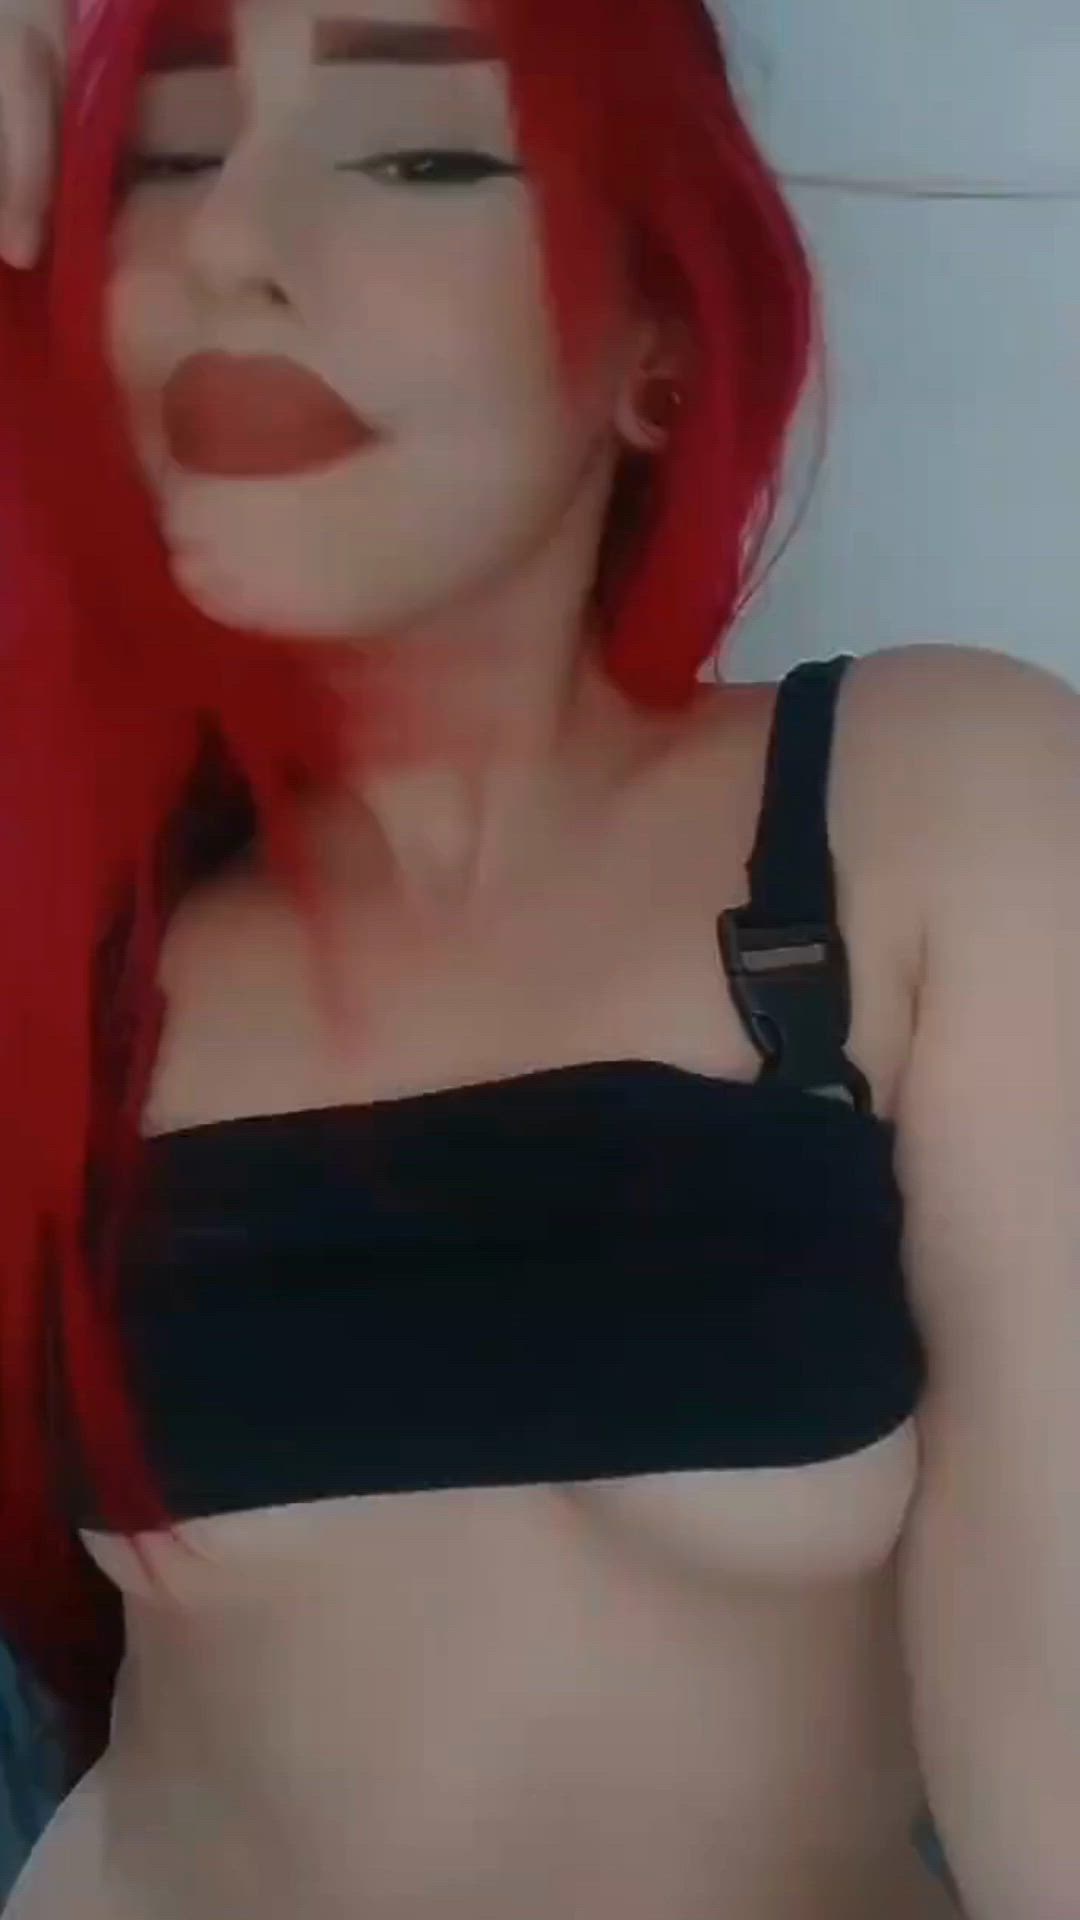 Redhead porn video with onlyfans model gizzelll <strong>@imgizzell</strong>